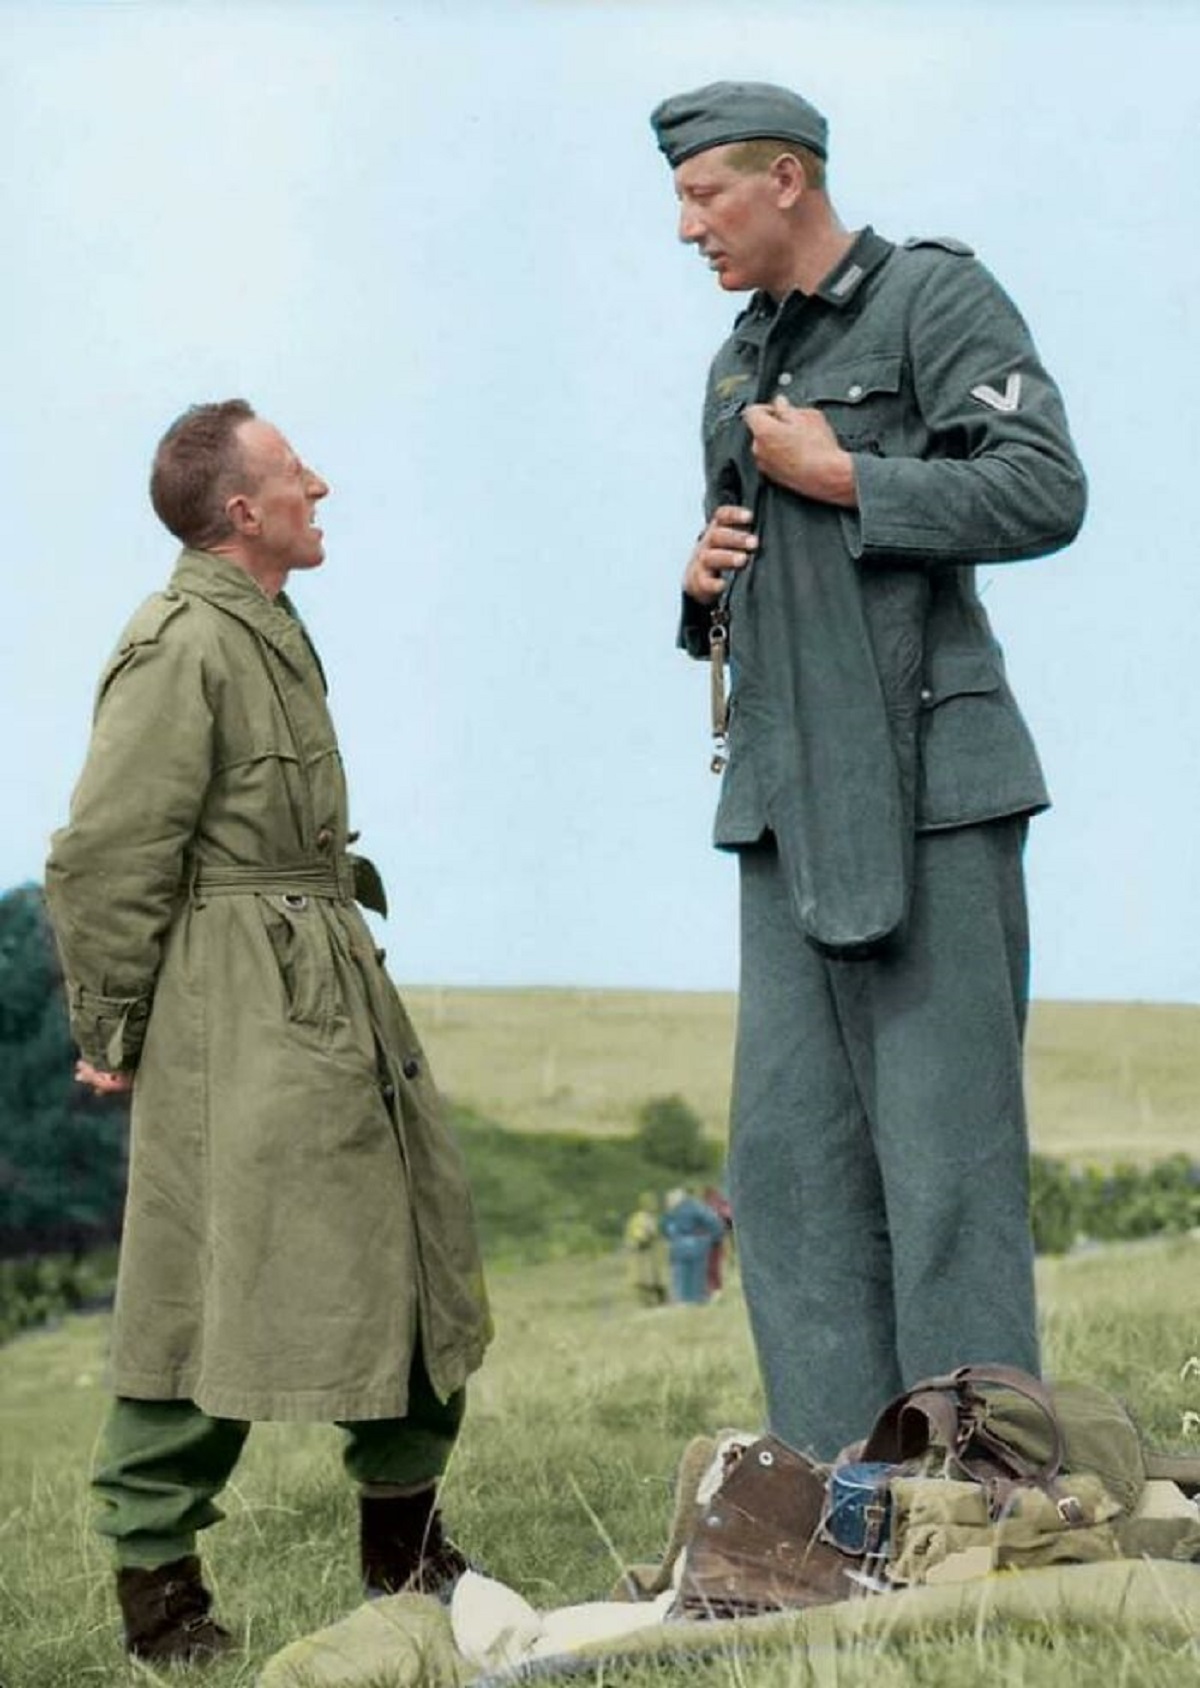 Jakob Nacken (221 cm), the tallest German soldier of World War II, chatting with British corporal Bob Roberts after surrendering to him near Calais, France, 1944.